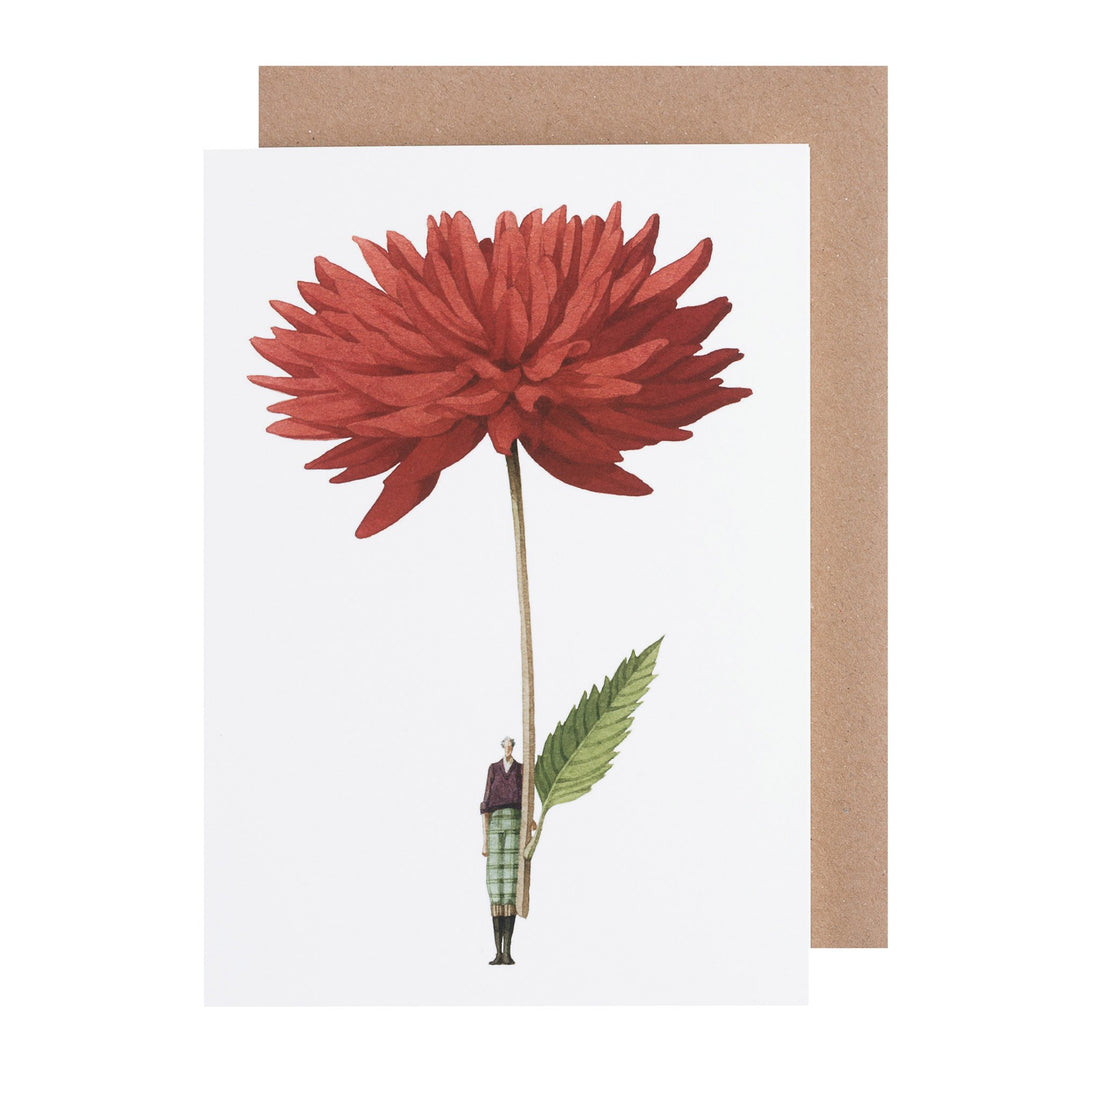 A greeting card featuring a stylized illustration of a small man holding a gigantig red-orange dahlia bloom by the stem on a white background, with a kraft paper envelope included.